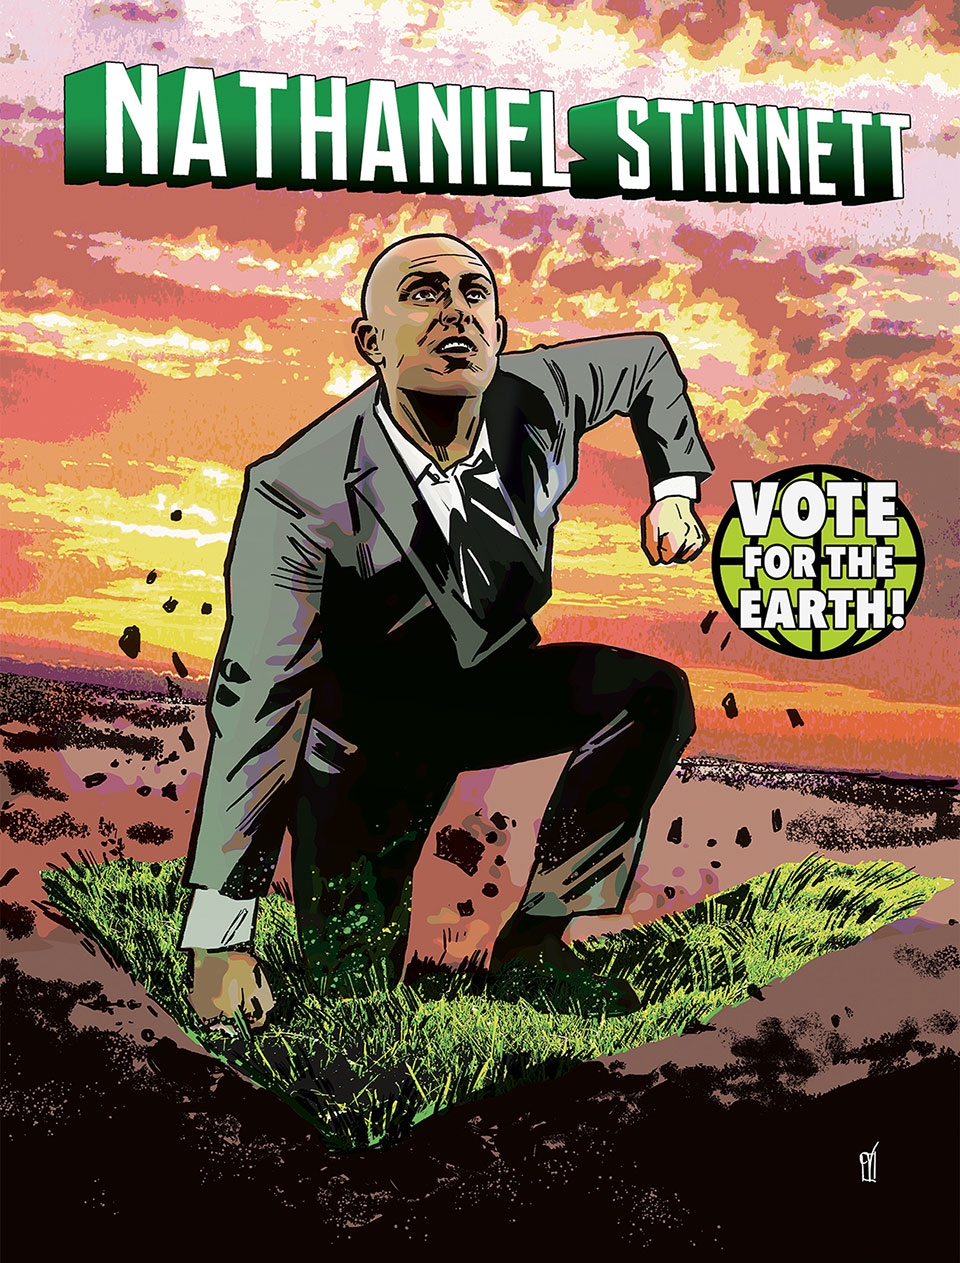 Nathaniel Stinnett, Founder and executive director of the Environmental Voter Project. Artwork by Valentine De Landro